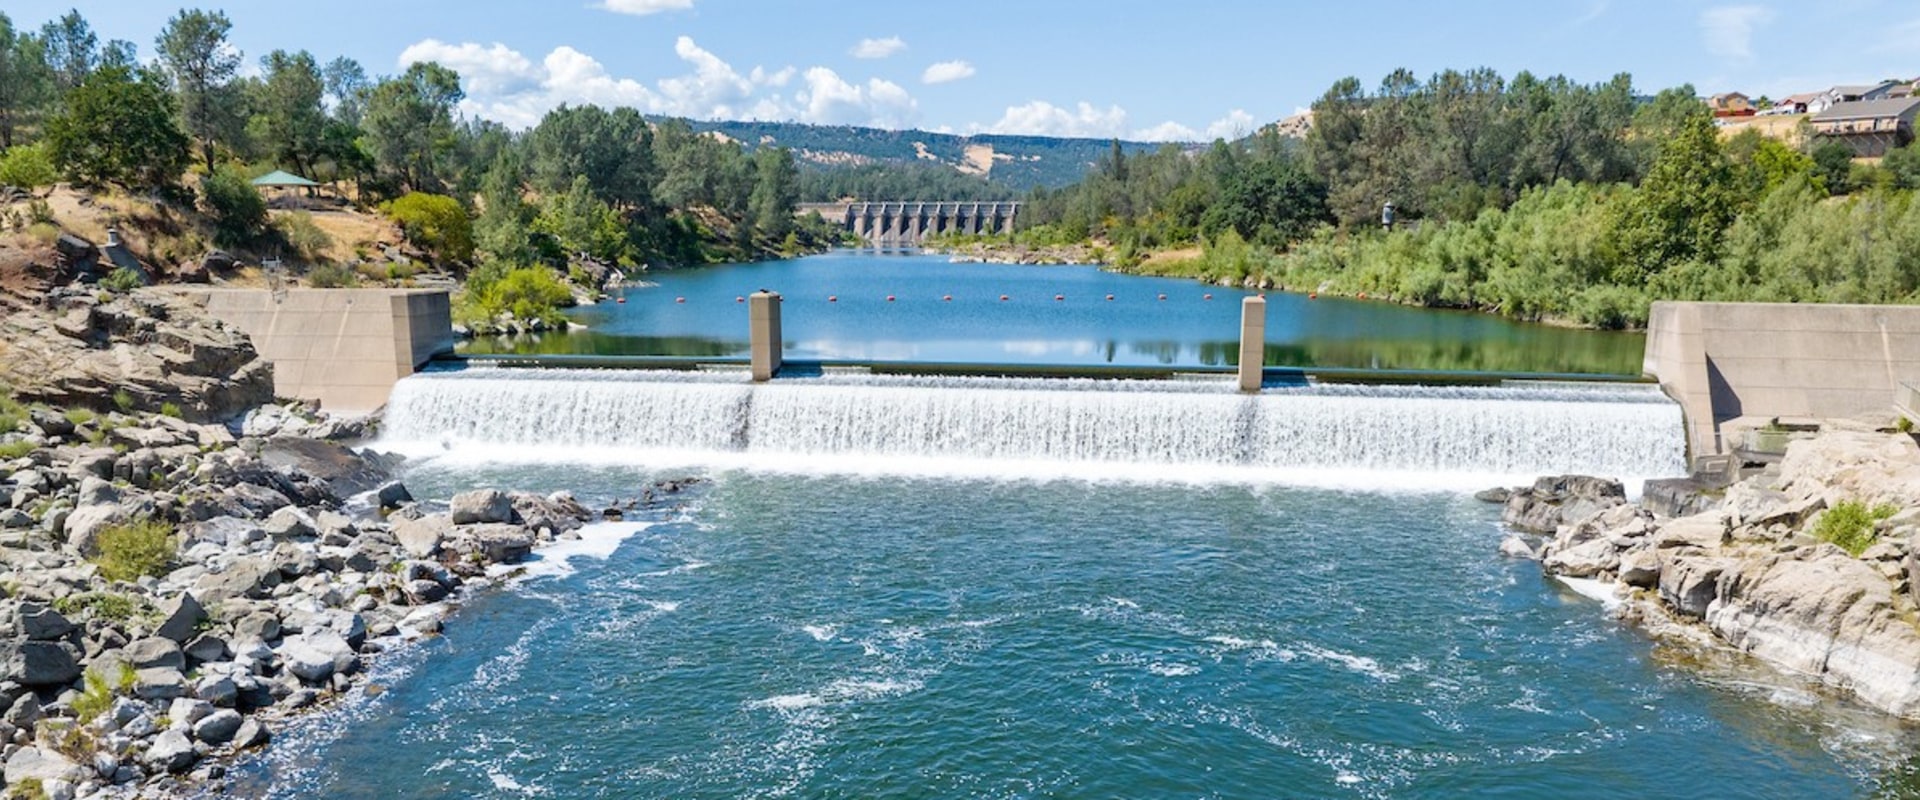 Economic Benefits for Local Communities: Supporting Conservation and Sustainable Practices on the Feather River